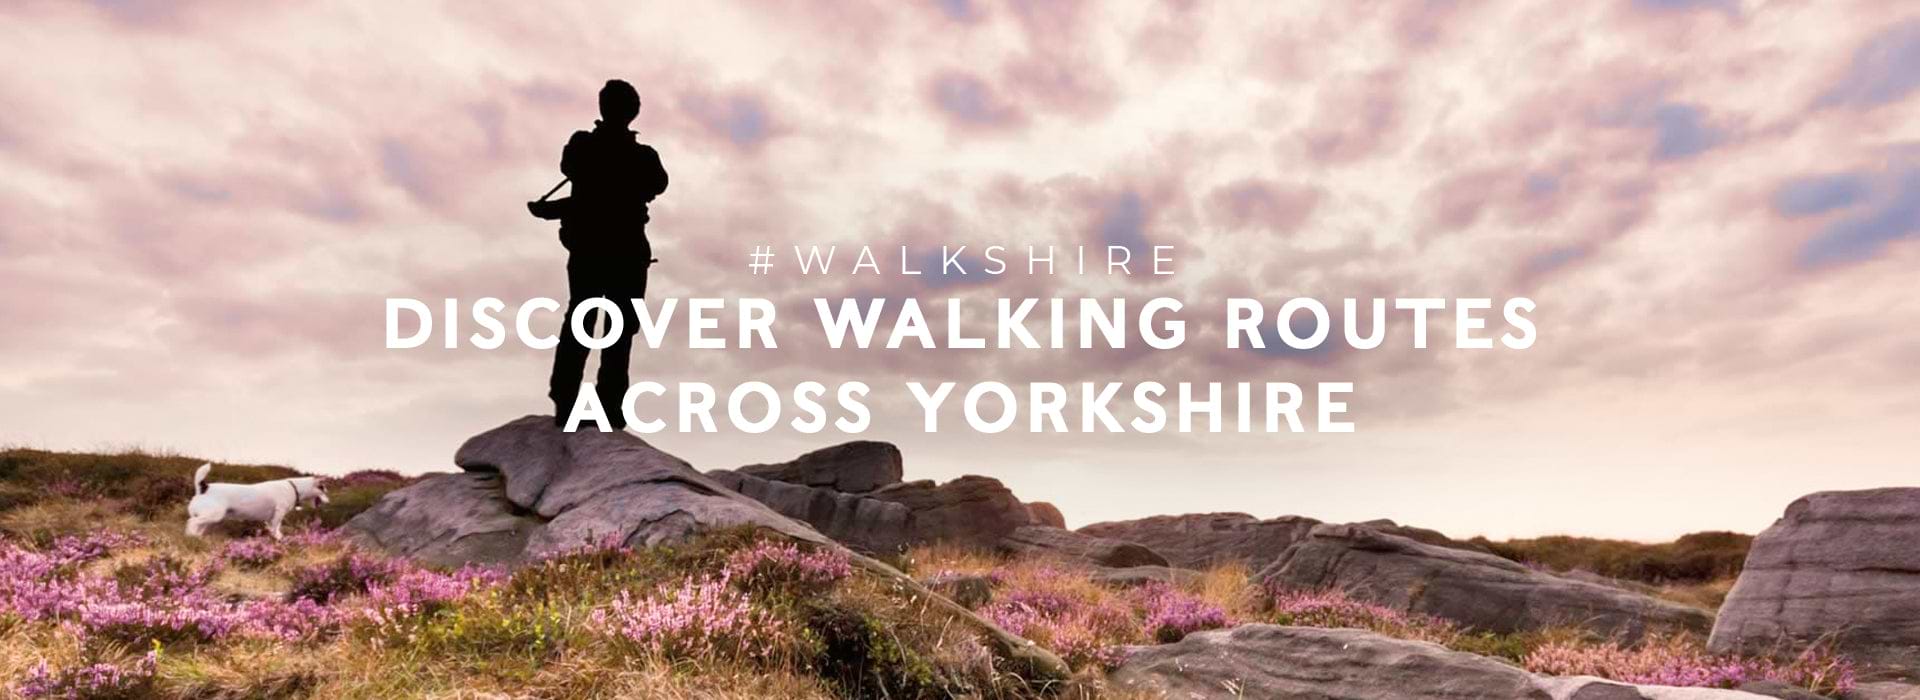 Discover walking routes across Yorkshire